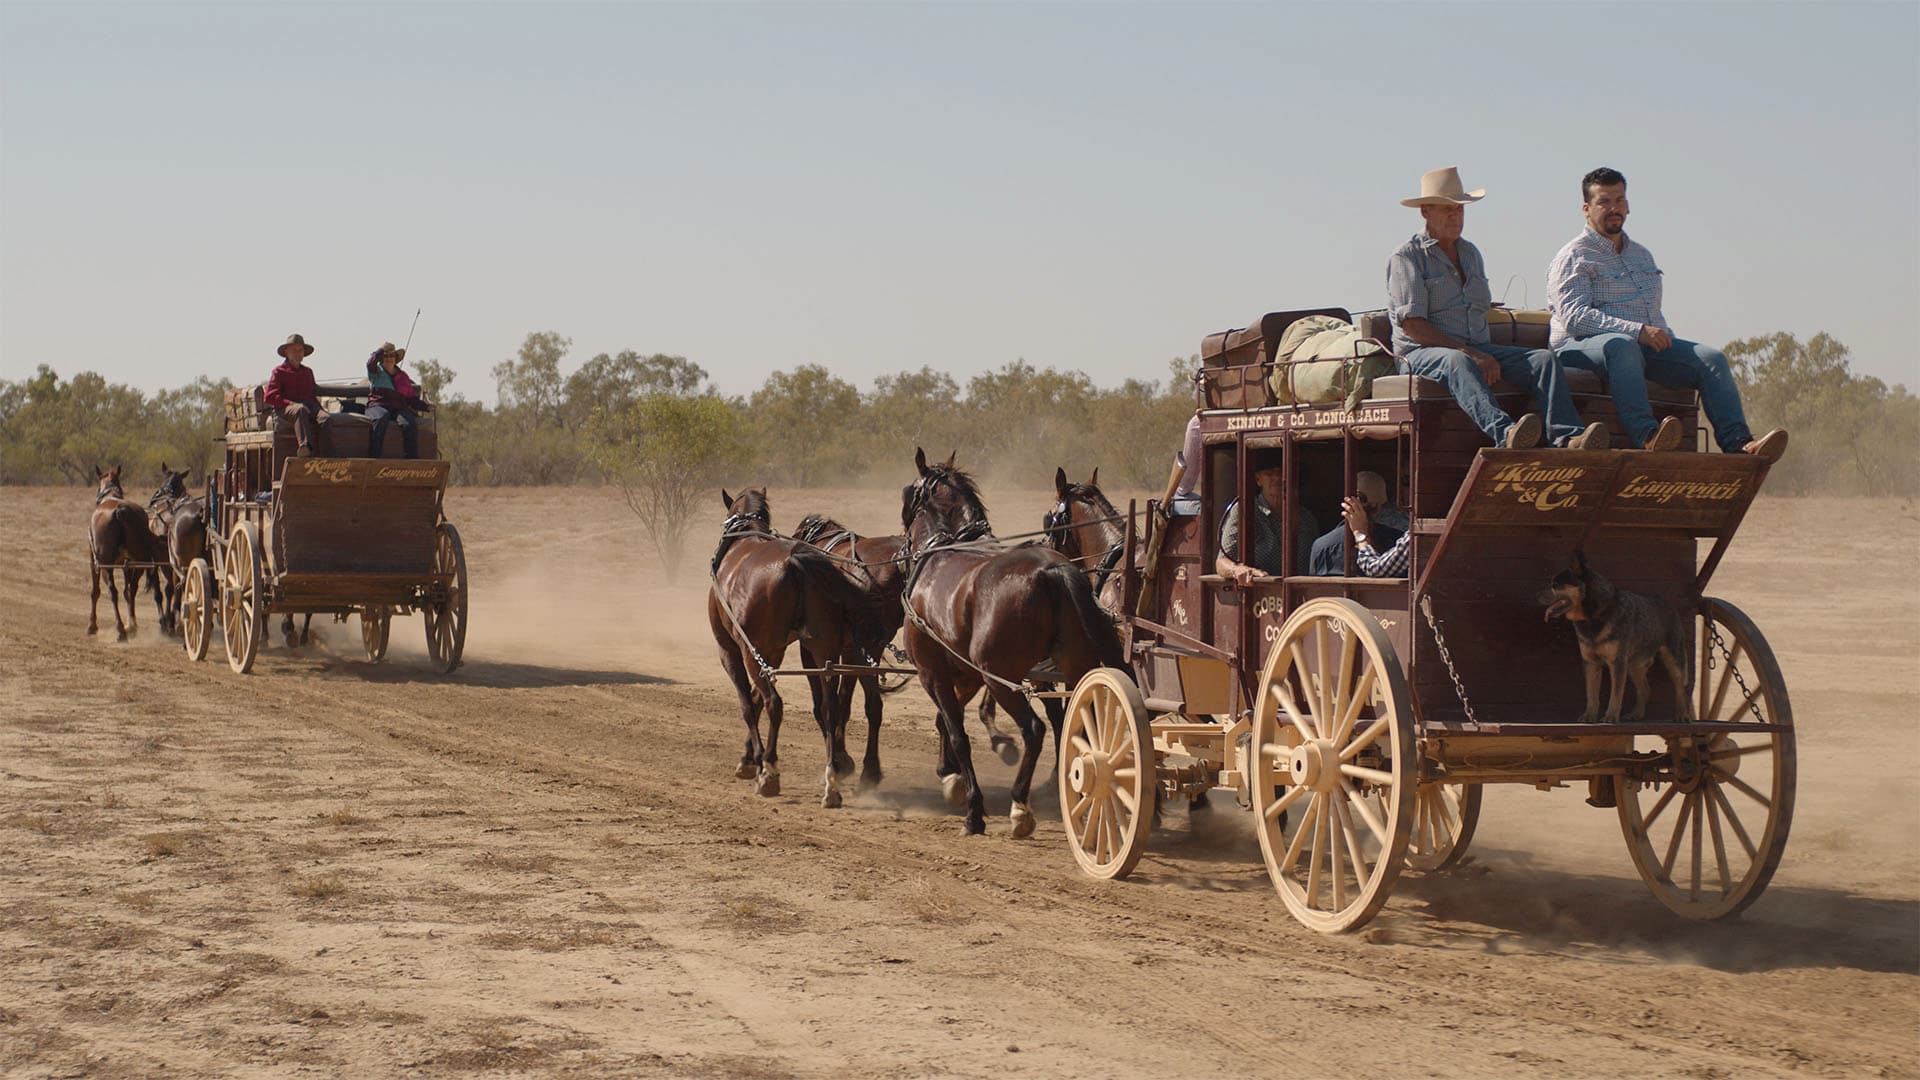 Cobb and Co stagecoach ride